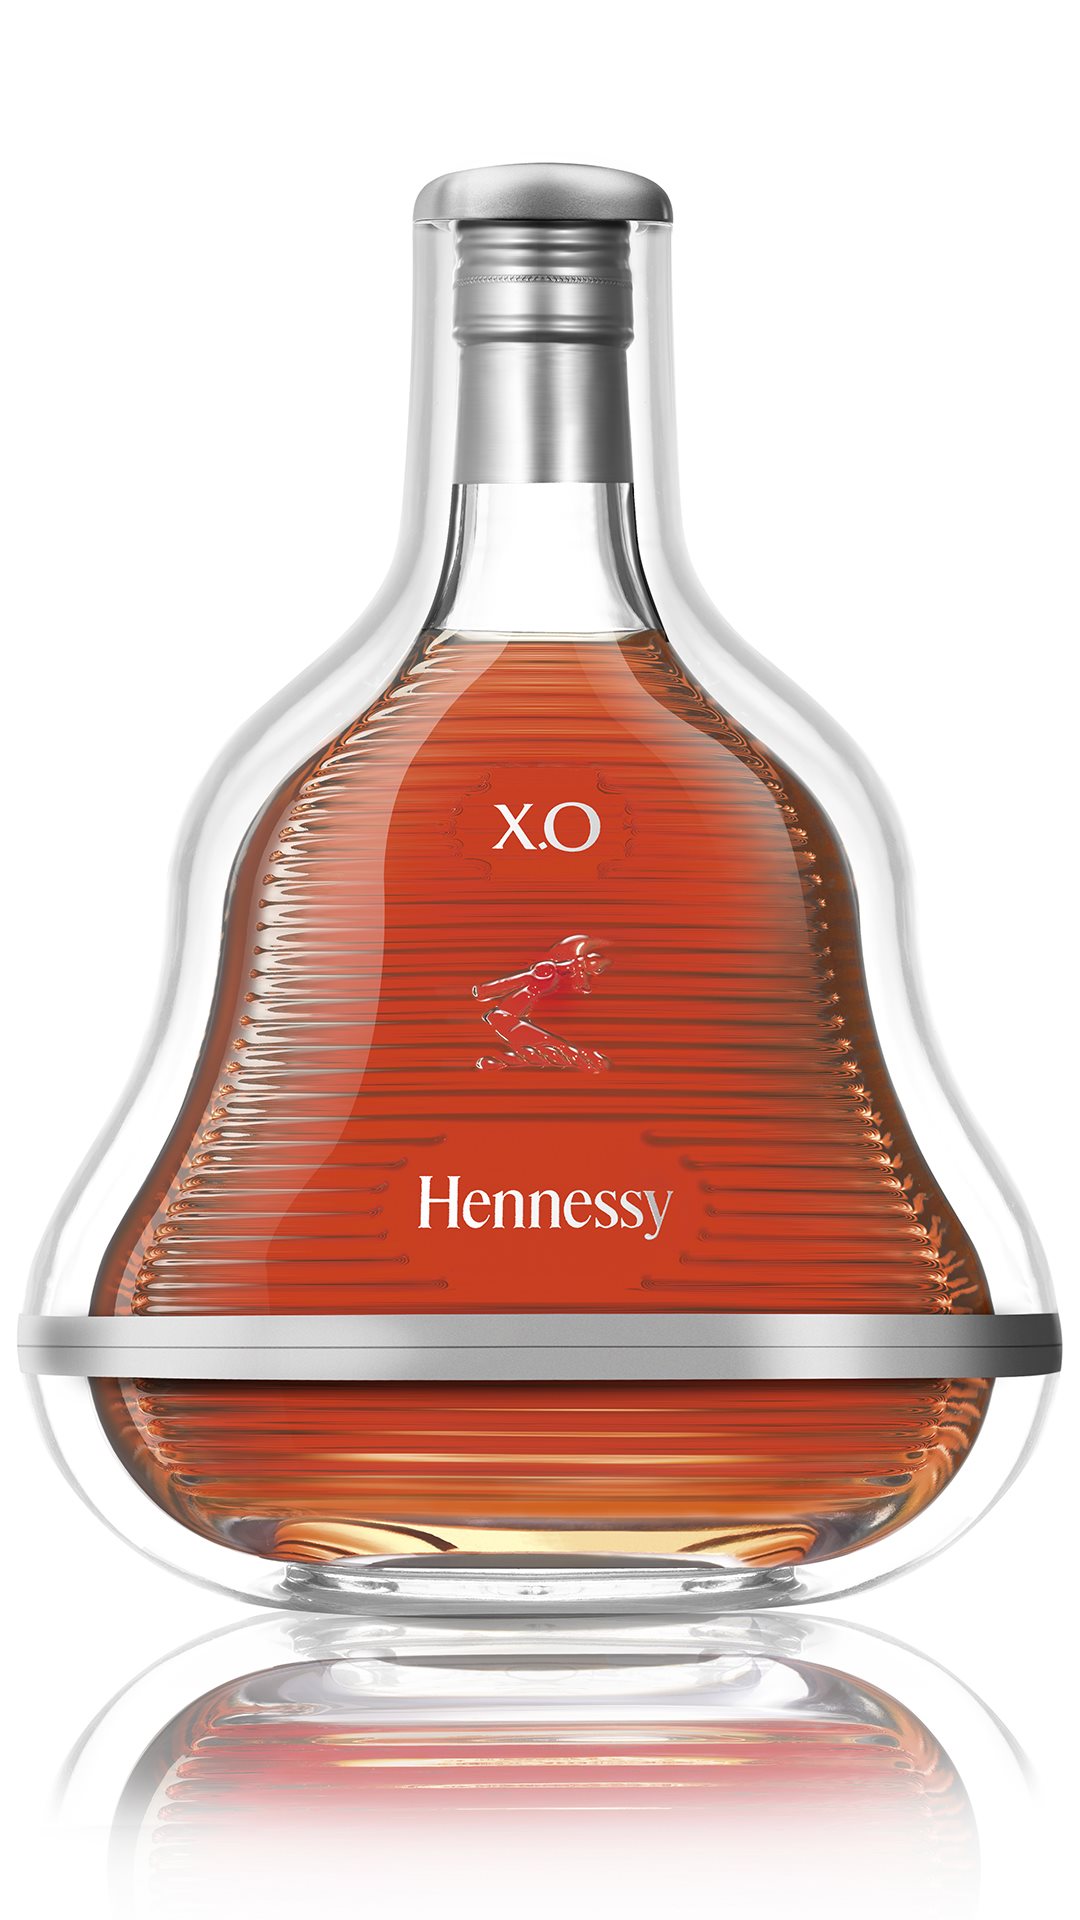 02 Hennessy X.O 2017 - Limited Edition by Marc Newson